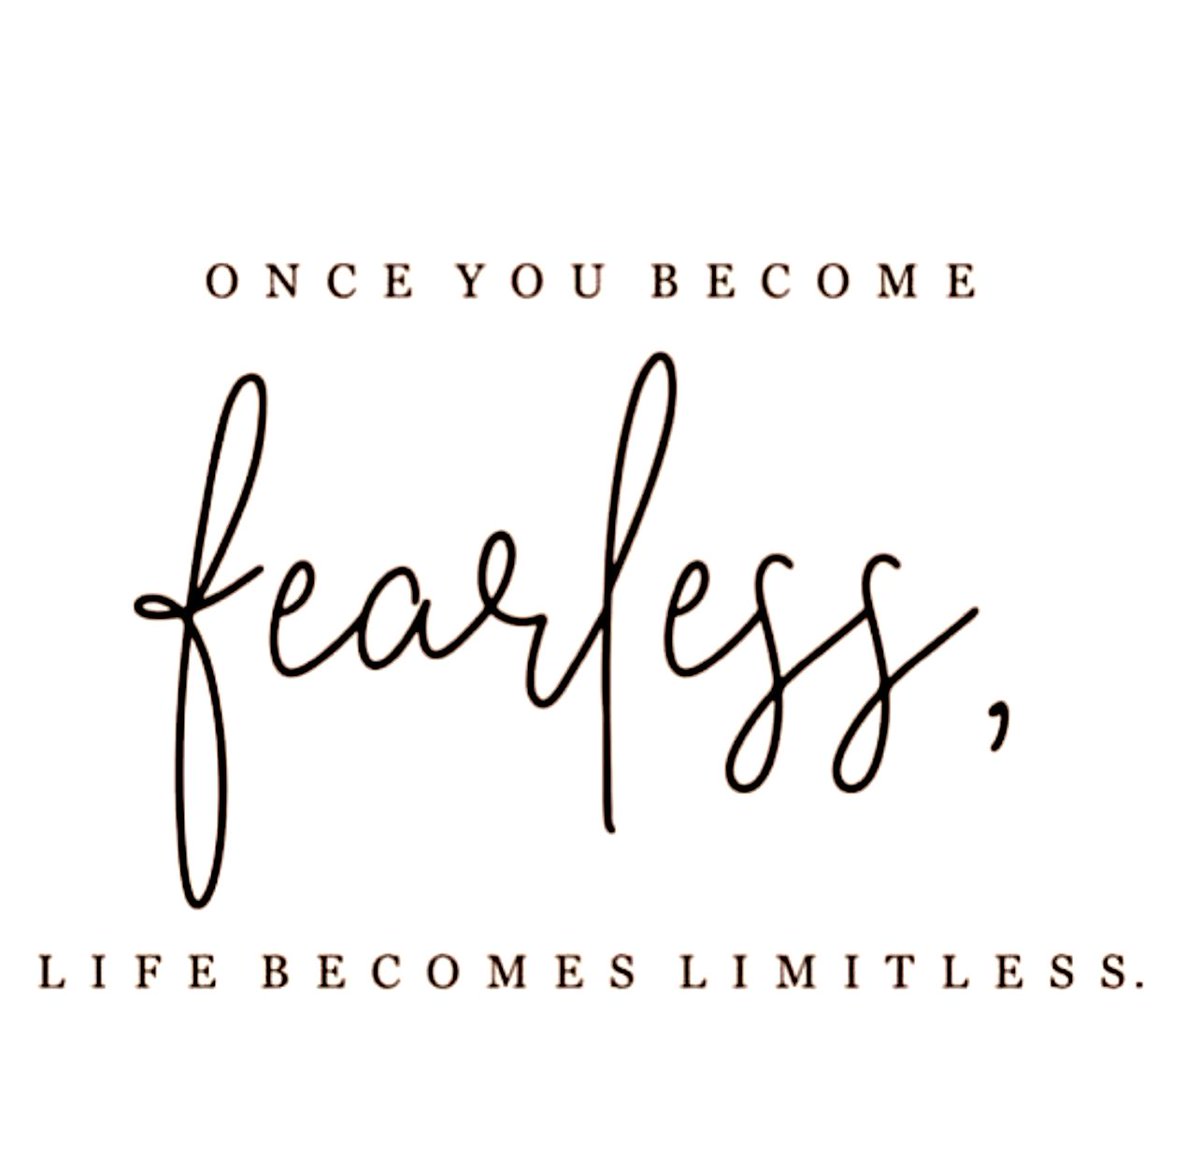 Happy Thursday and your daily dose of inspiration!💕

Fearlessness!
Once you become fearless, you become limitless. 💕

Grateful for the opportunity to live, love, and lead.💕

#ALLmeansALL #GreenfieldGuarantee #ProudtobeGUSD
#CultivateCuriosity
#TrustAndInspire
#TrustAndGrow